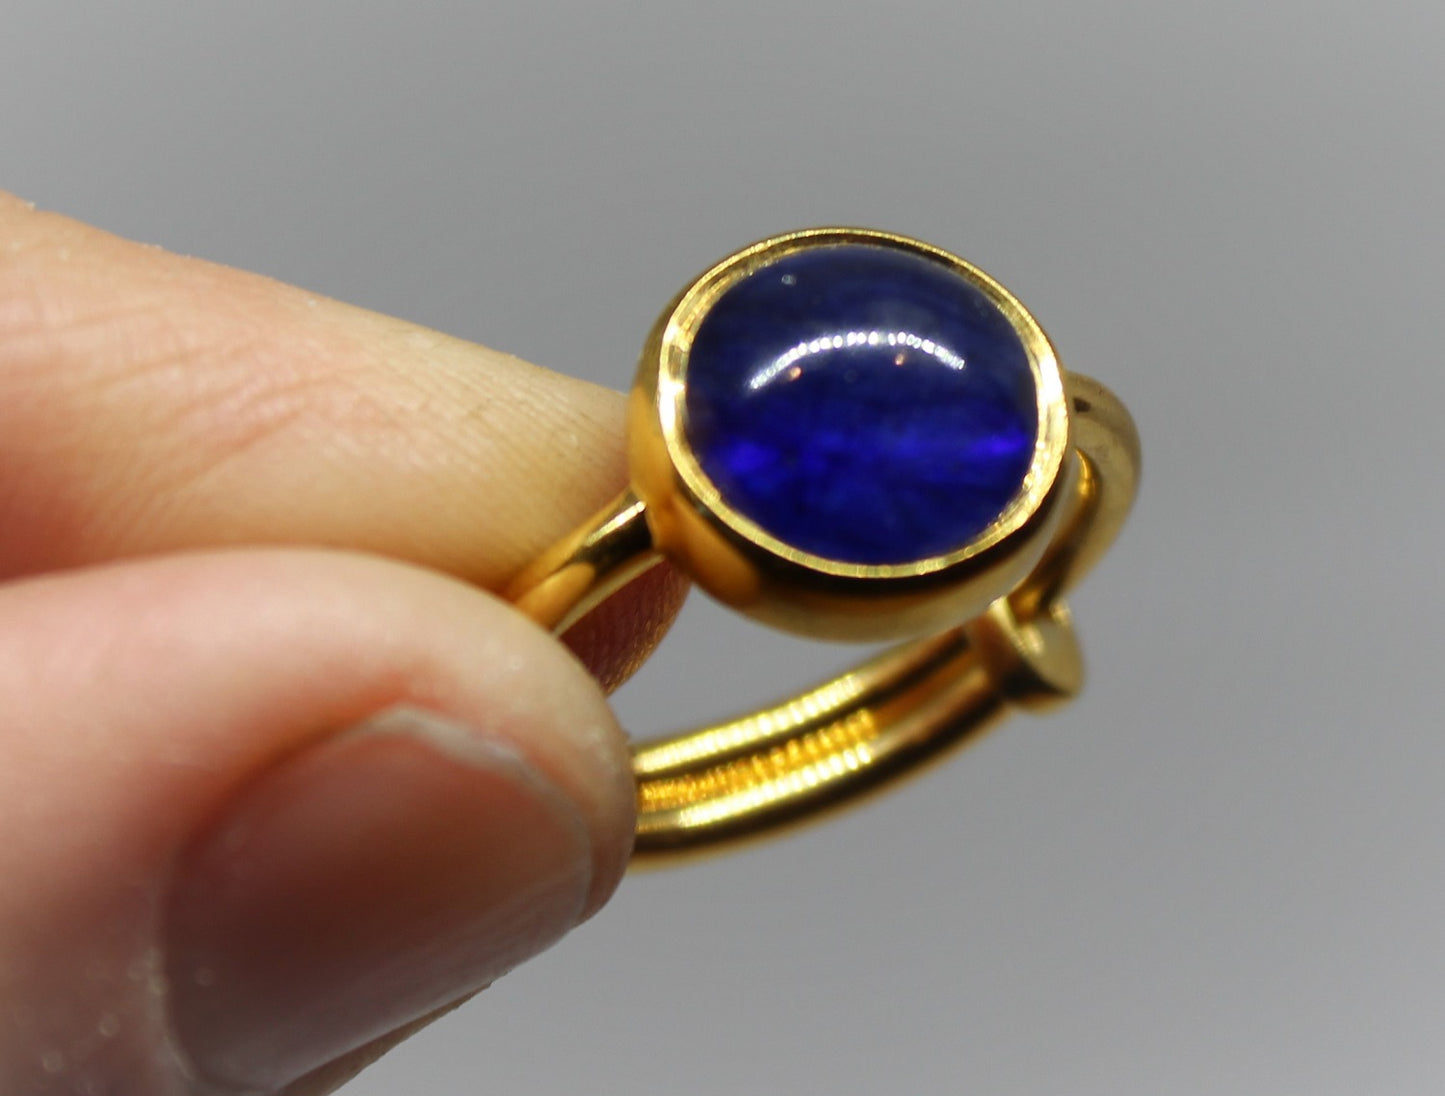 Blue Sapphire Ring - 24k Gold Plated - Adjustable Size  - Joy#186